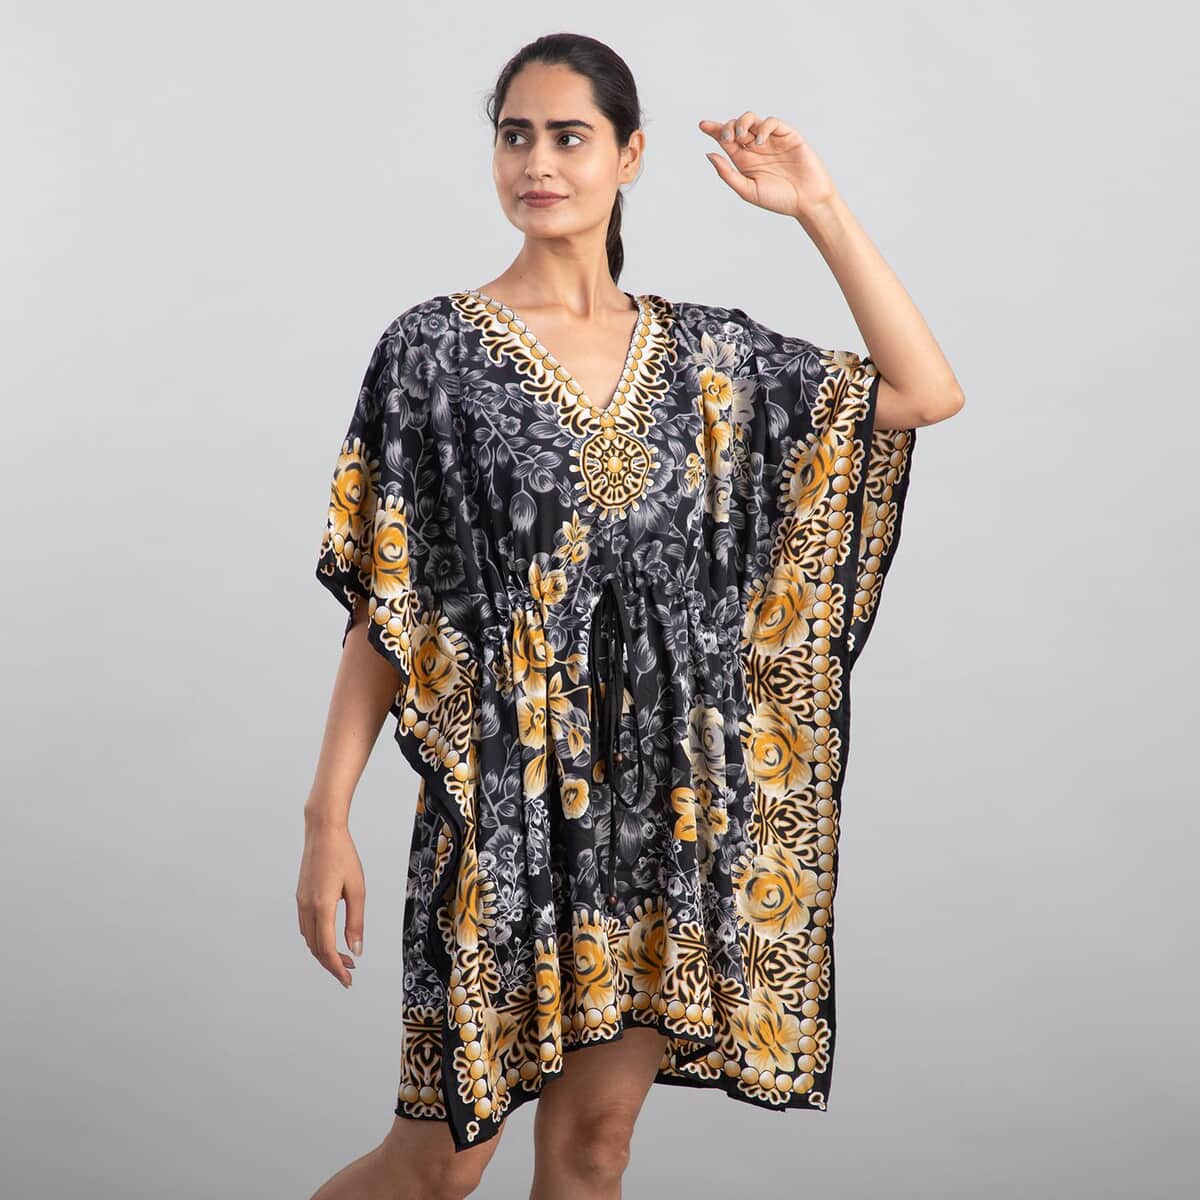 TAMSY Gray Floral Print 100% Polyester V-neck Kaftan with Pockets - One Size Fits Most (36"x41") image number 3